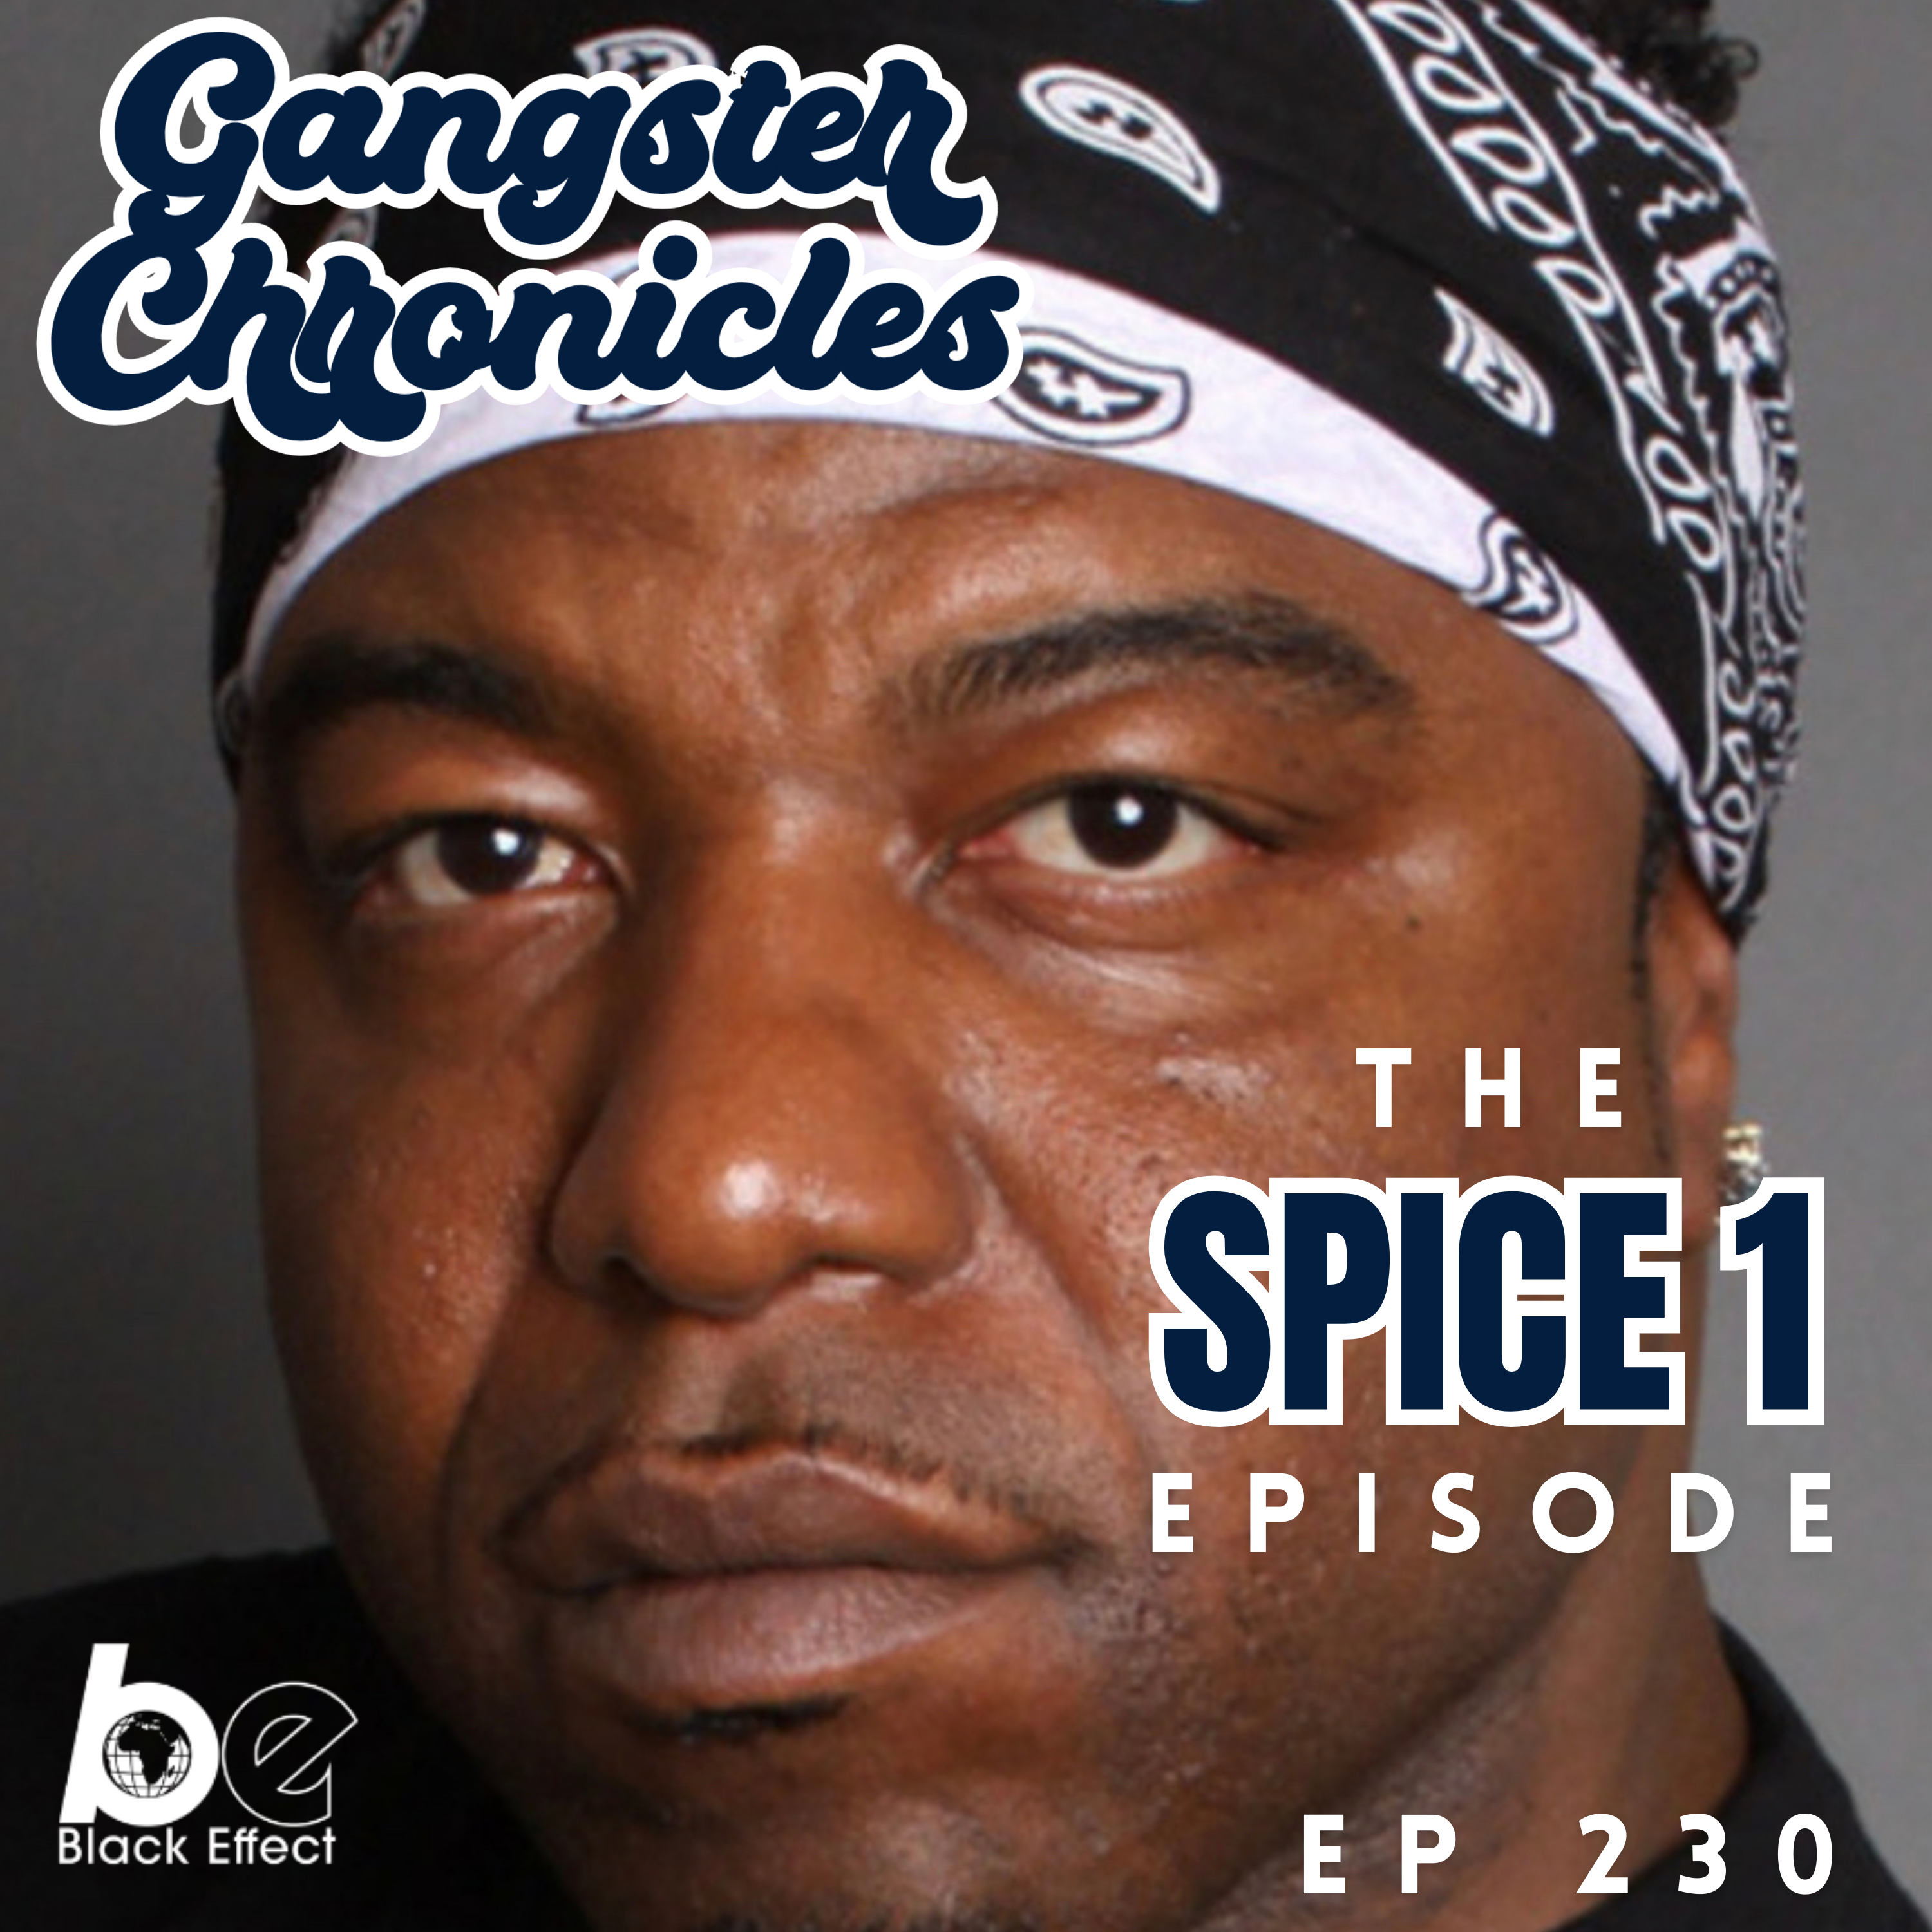 The Spice 1 Episode : "Me & Pac Stayed Blunted"